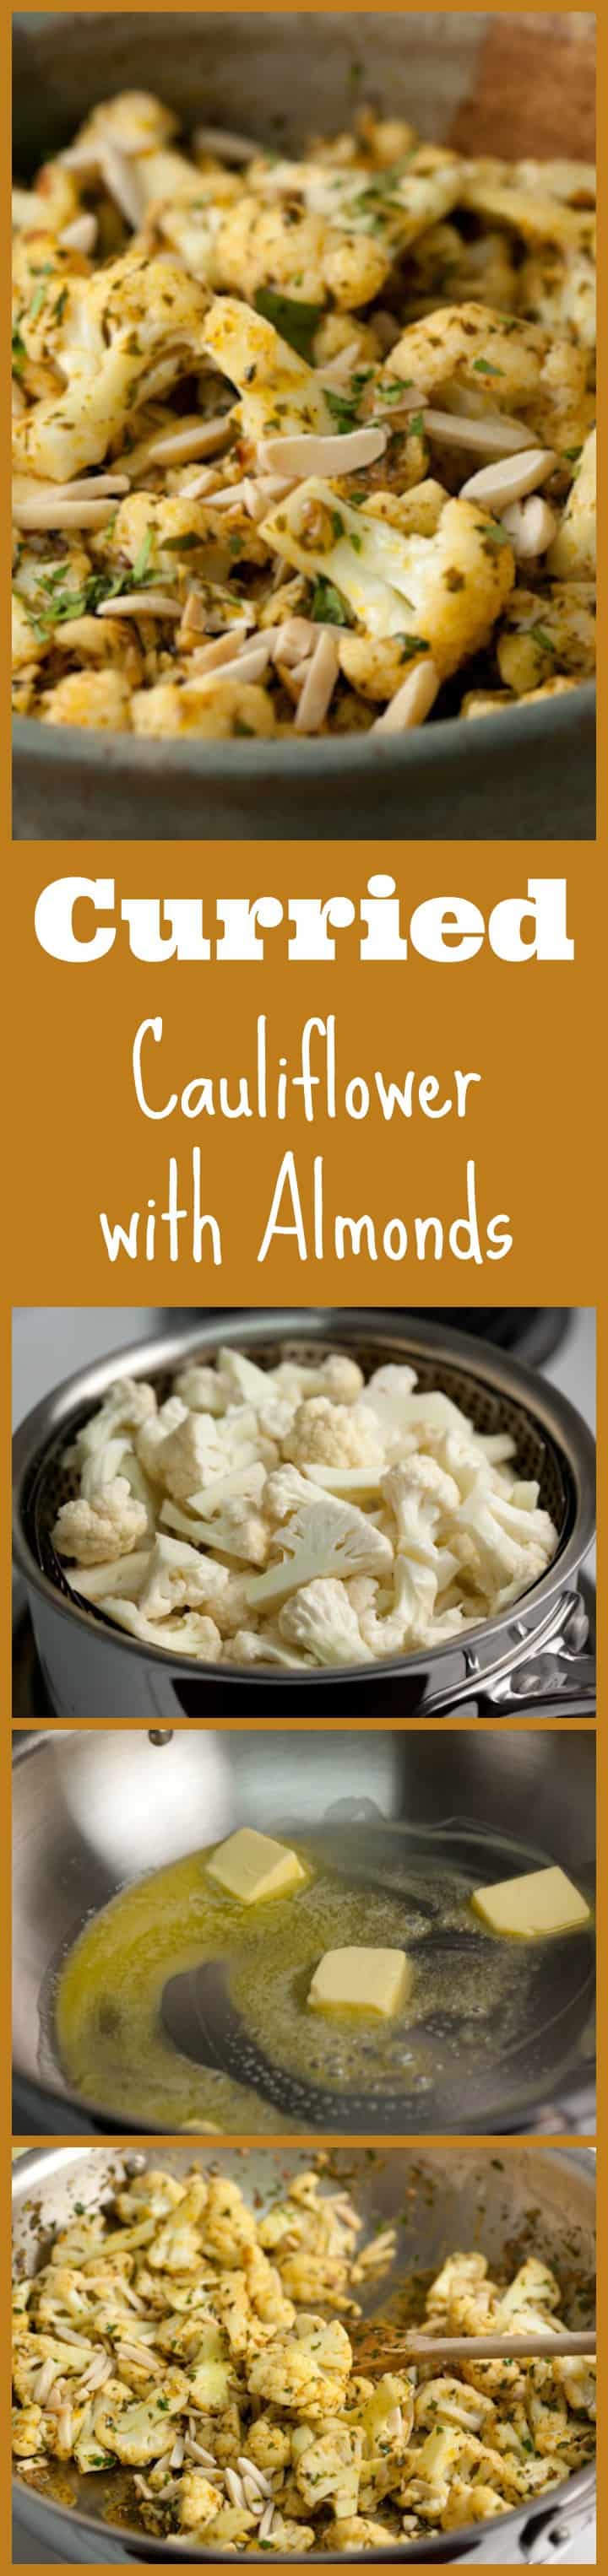 An easy side dish with lots of flavor. This curried cauliflower with almonds is delicious, simple to make, seasonal, and low carb!